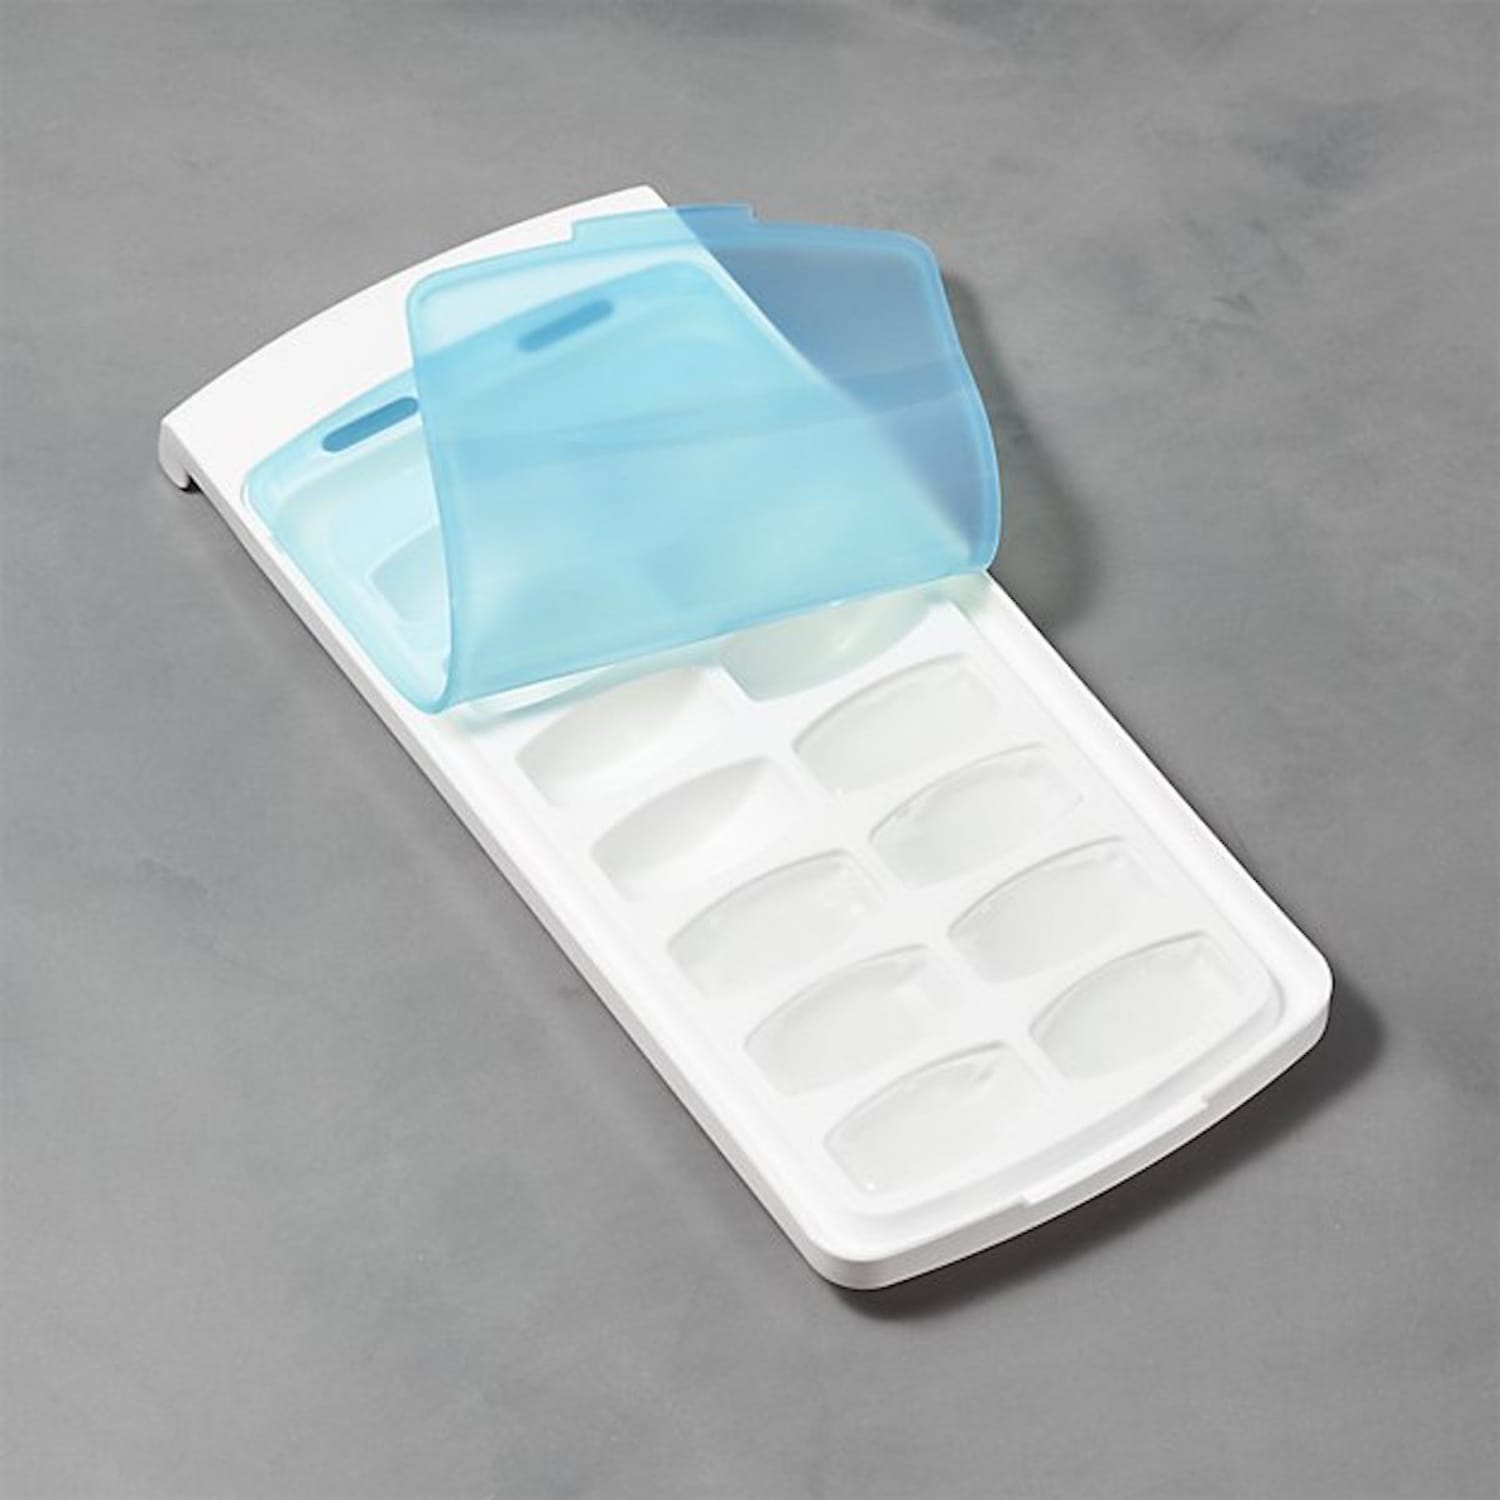 OXO Good Grips No-Spill Ice Cube Tray 